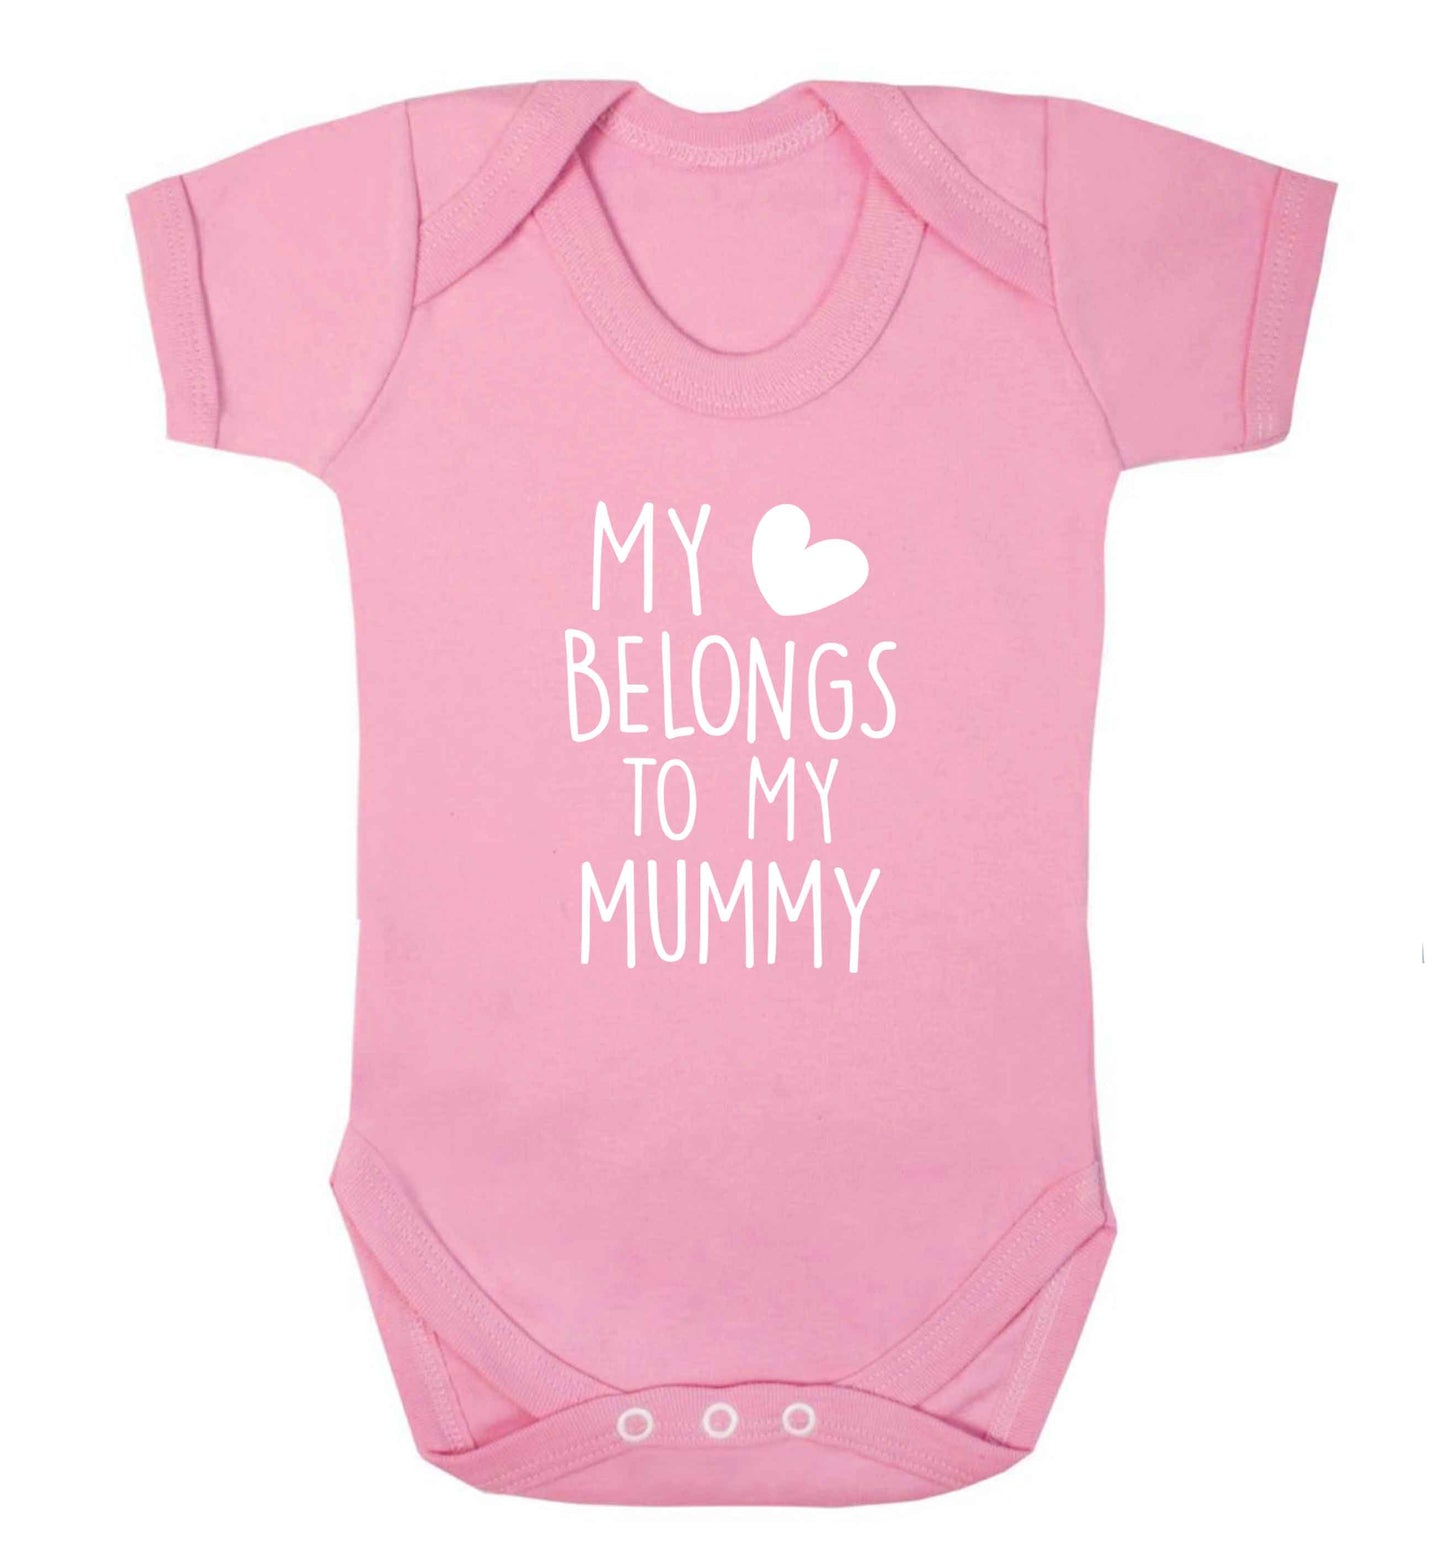 My heart belongs to my mummy baby vest pale pink 18-24 months